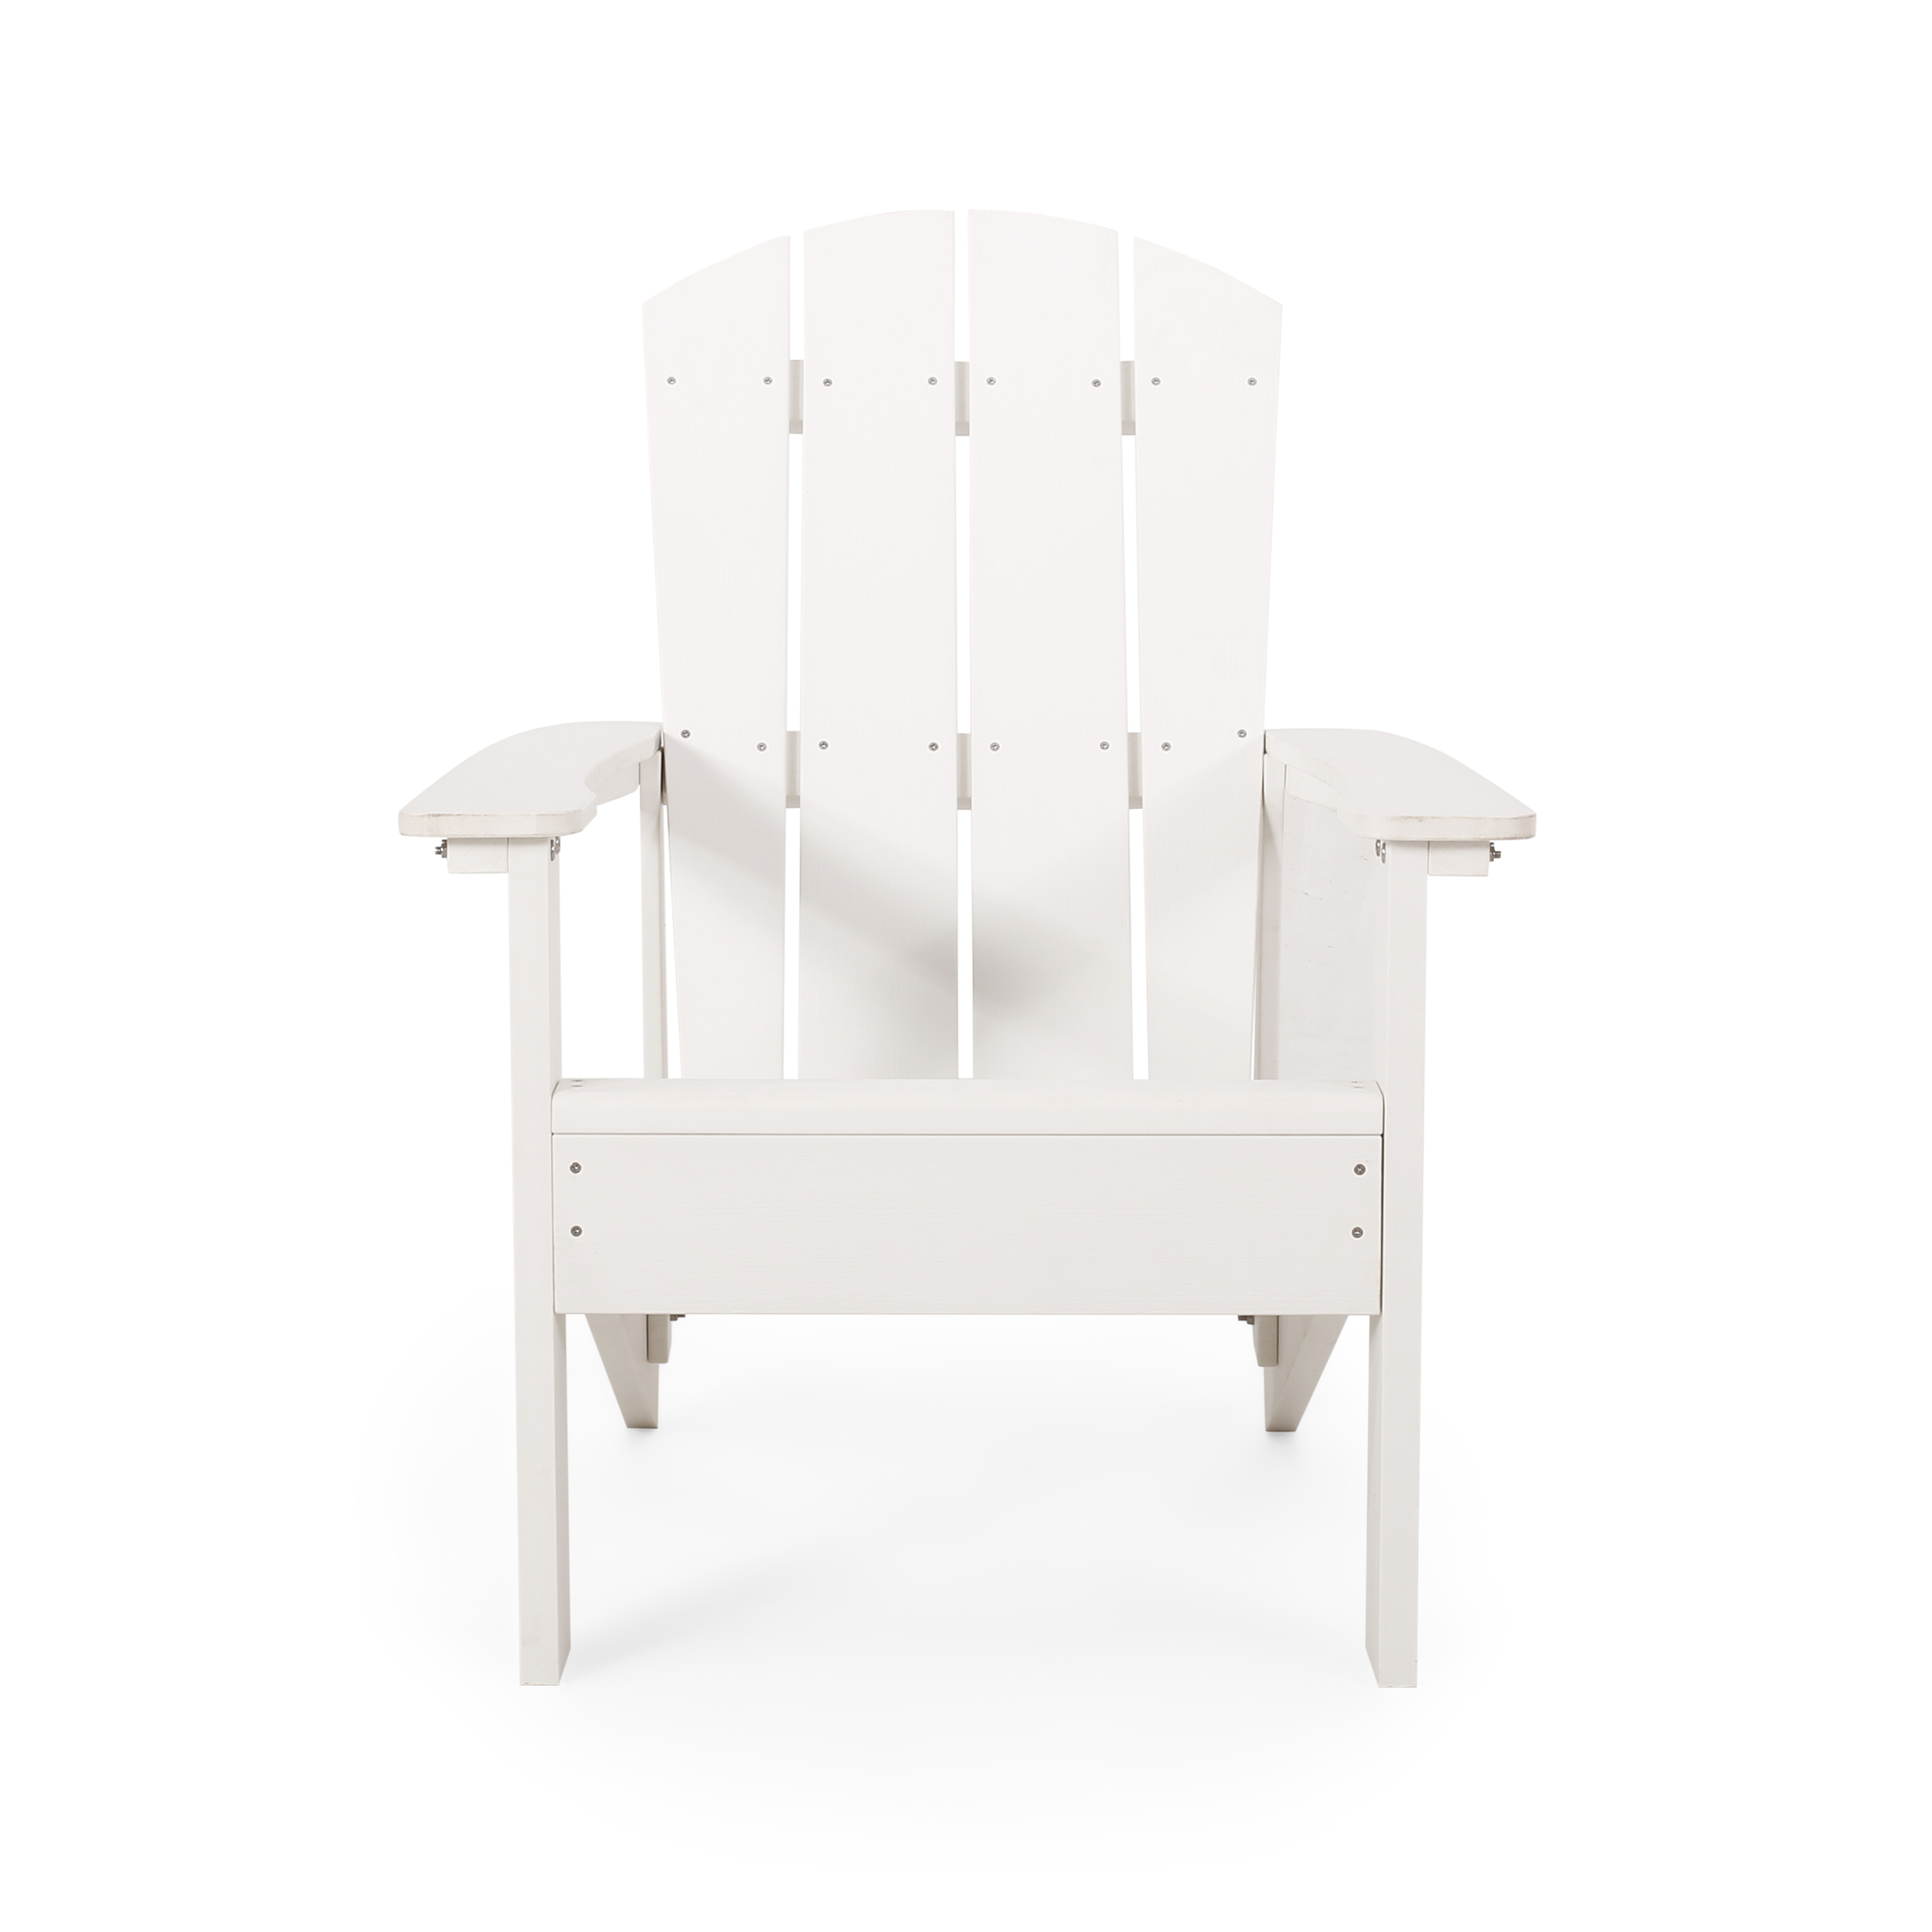 LANTRO JS Classic Pure White Outdoor Solid Wood Adirondack Chair Garden Lounge Chair - image 2 of 7